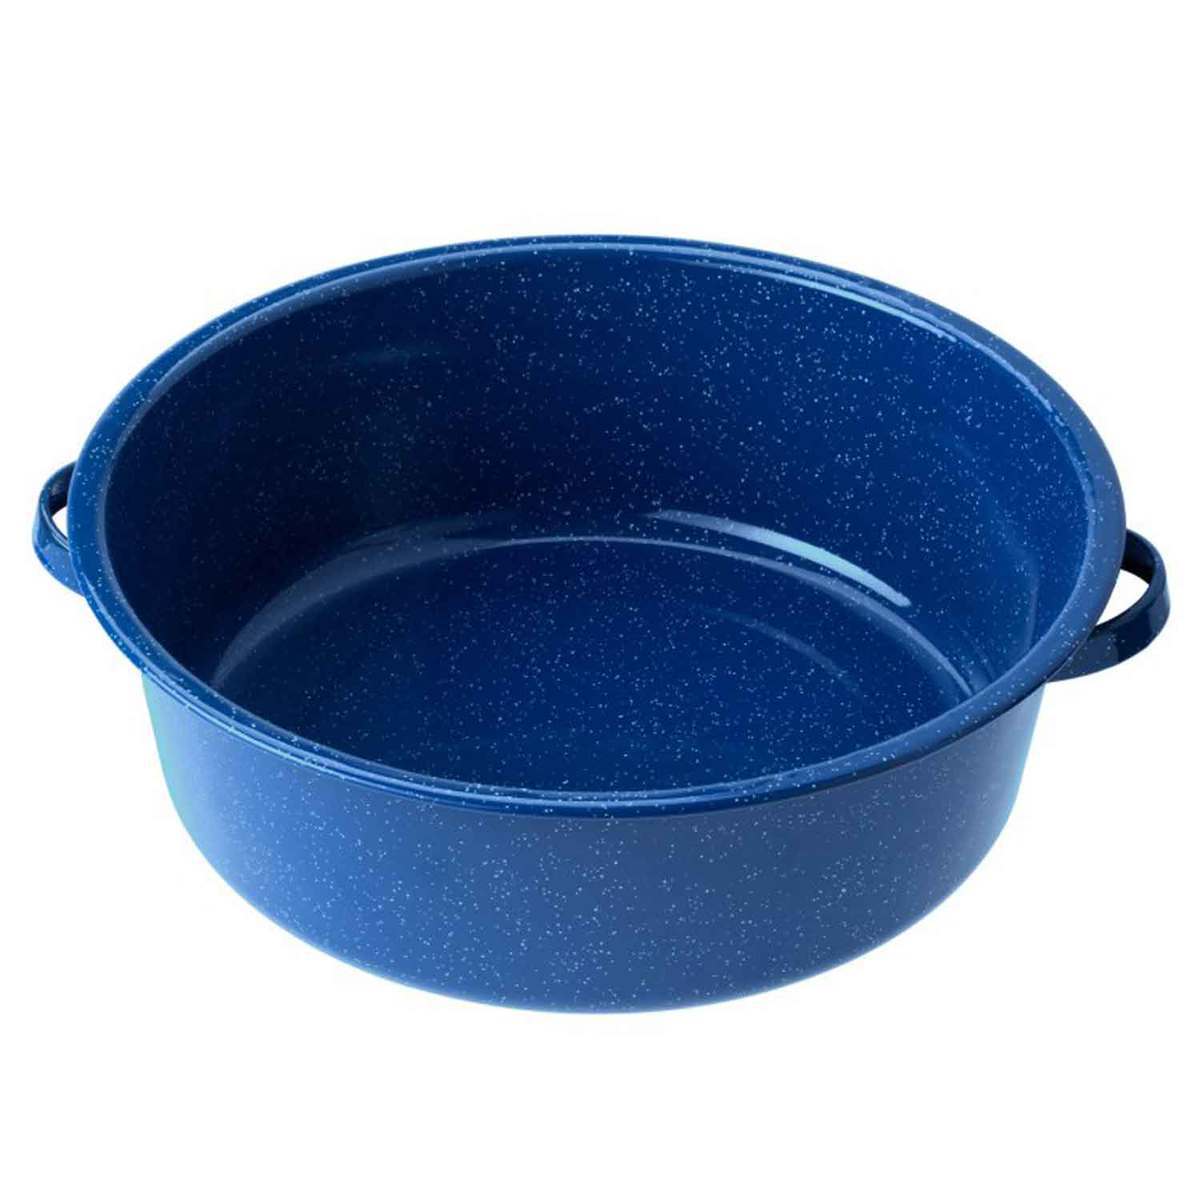 LoCo COOKERS LoCo Batter Bowl for Turkey Fryer - Universal Basket